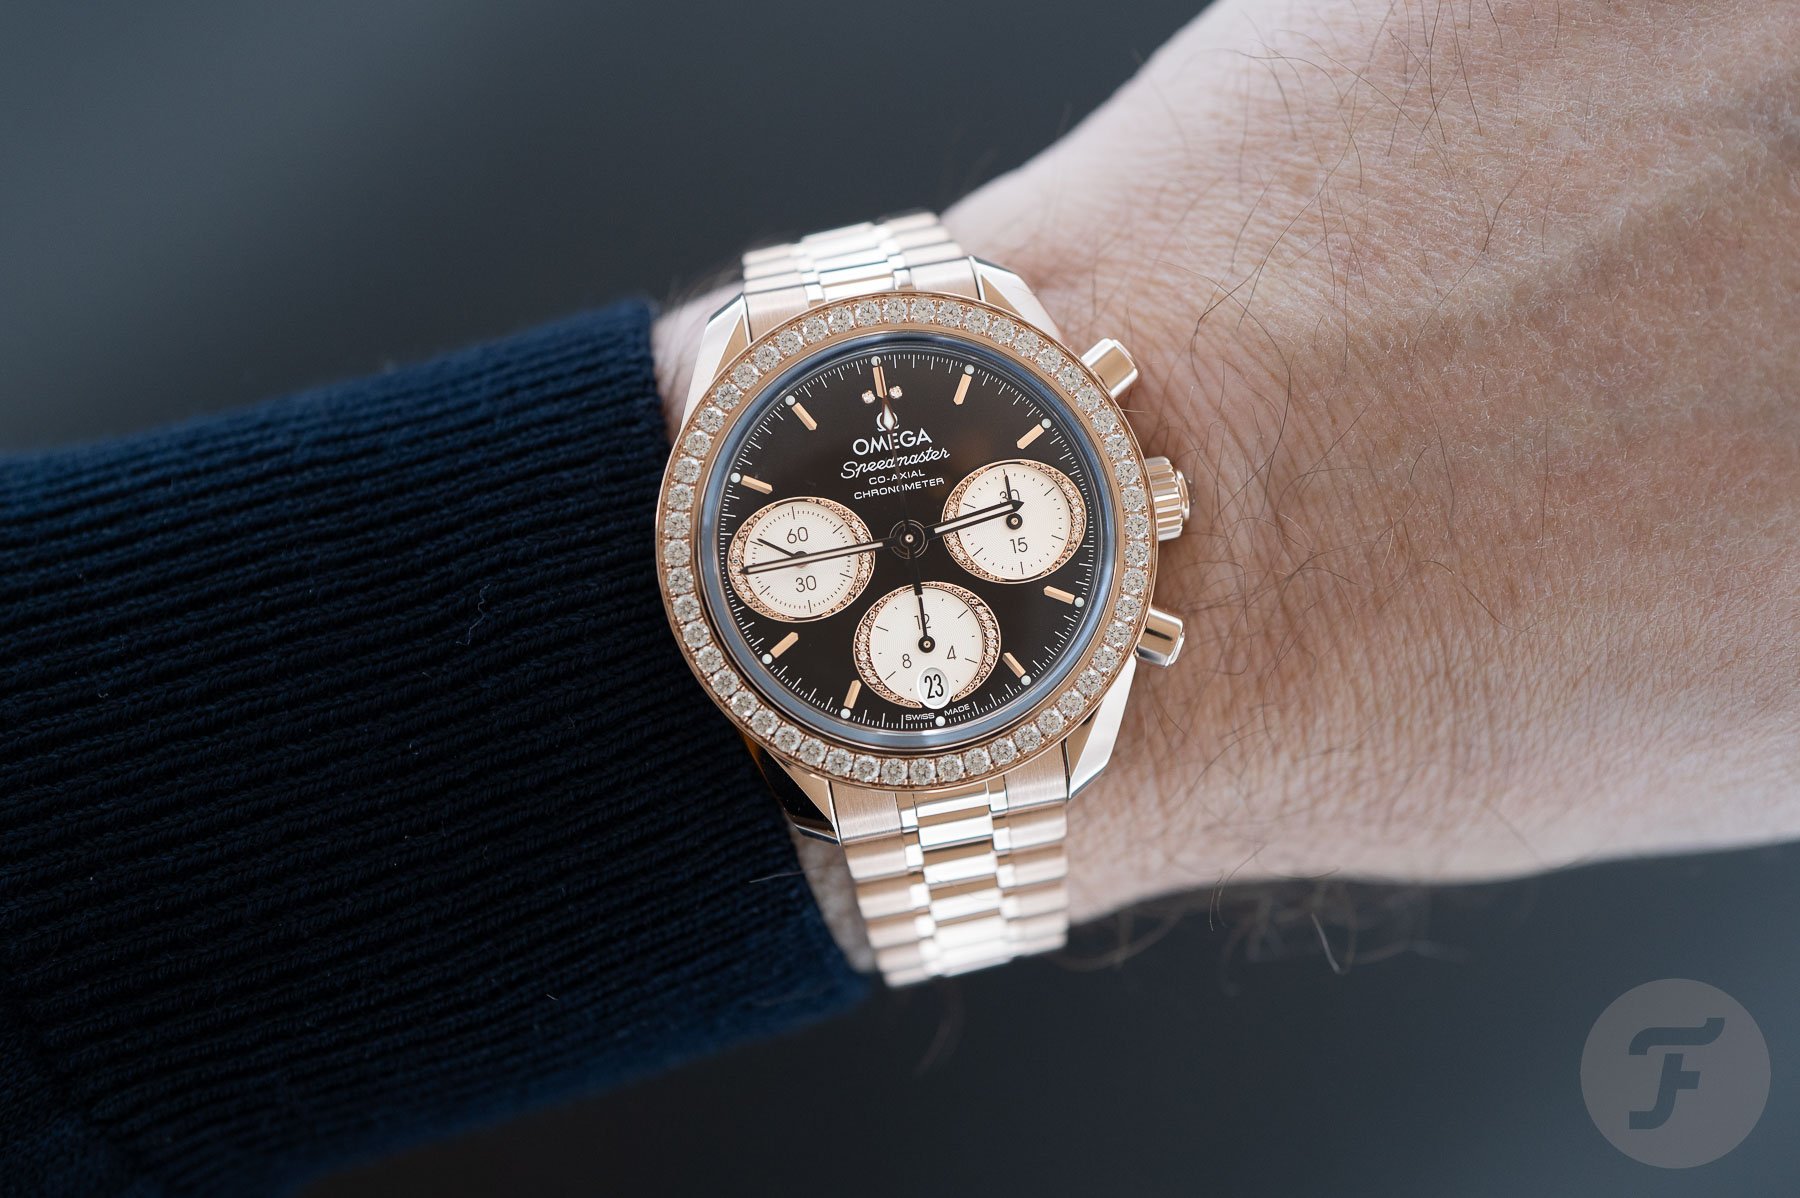 Introducing: New Omega Speedmaster 38 Models In Full Gold And Steel